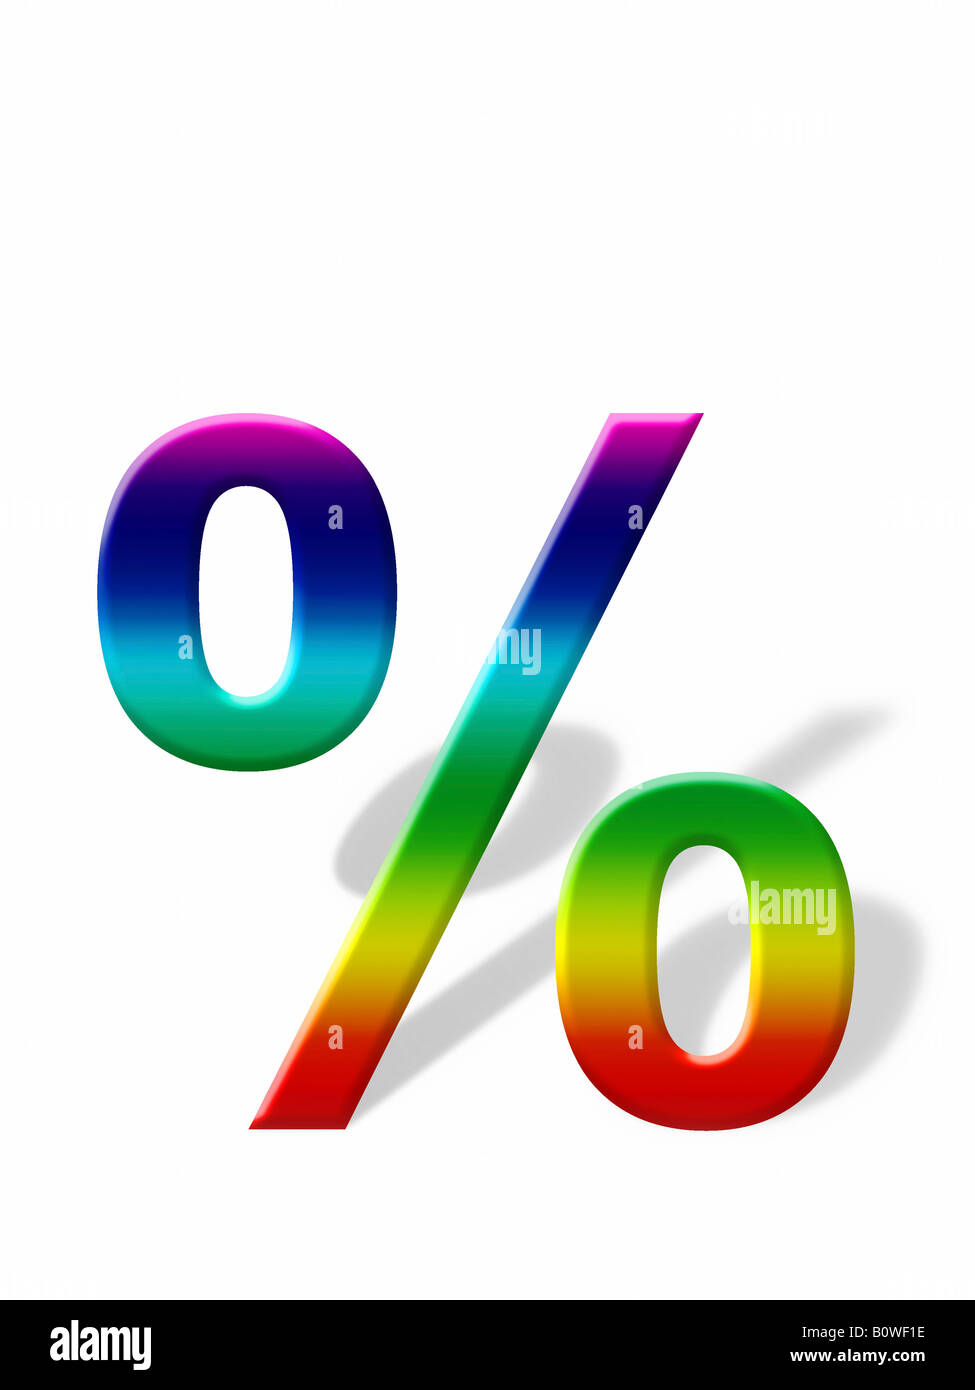 Percent symbol casting a shadow, graphic Stock Photo